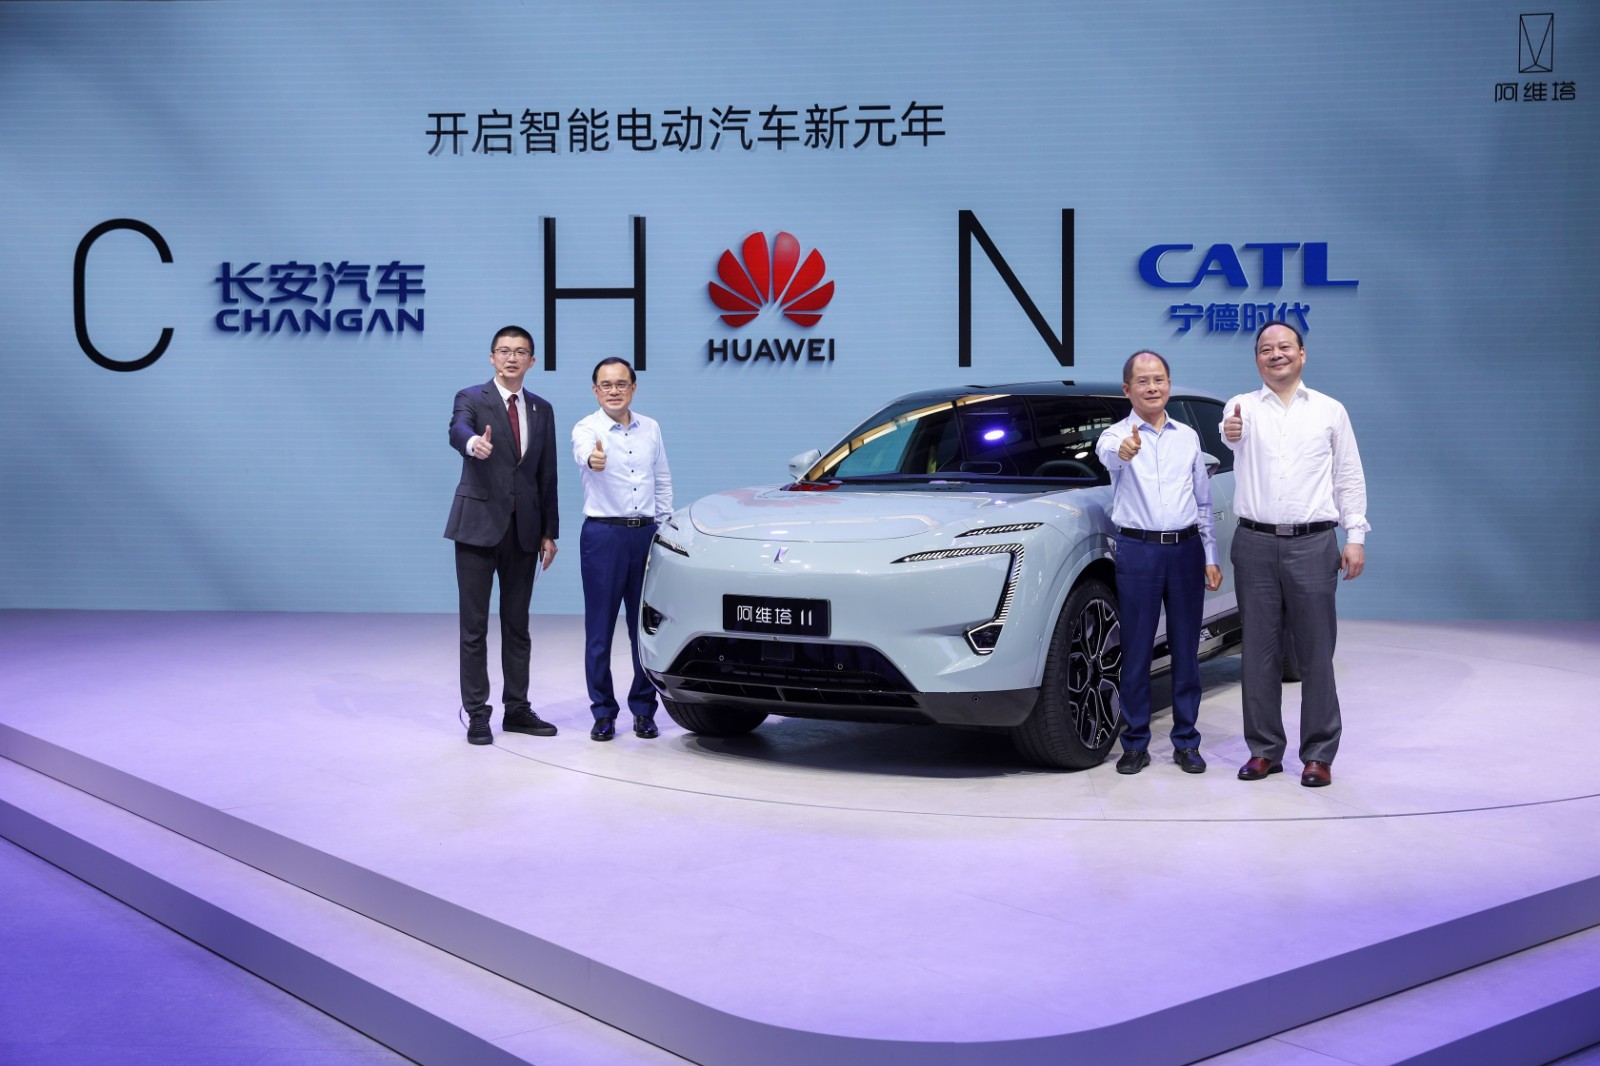 Changan Automobile, Huawei and CATL Jointly Launch the All New Smart  Electric Vehicle Architecture CHN